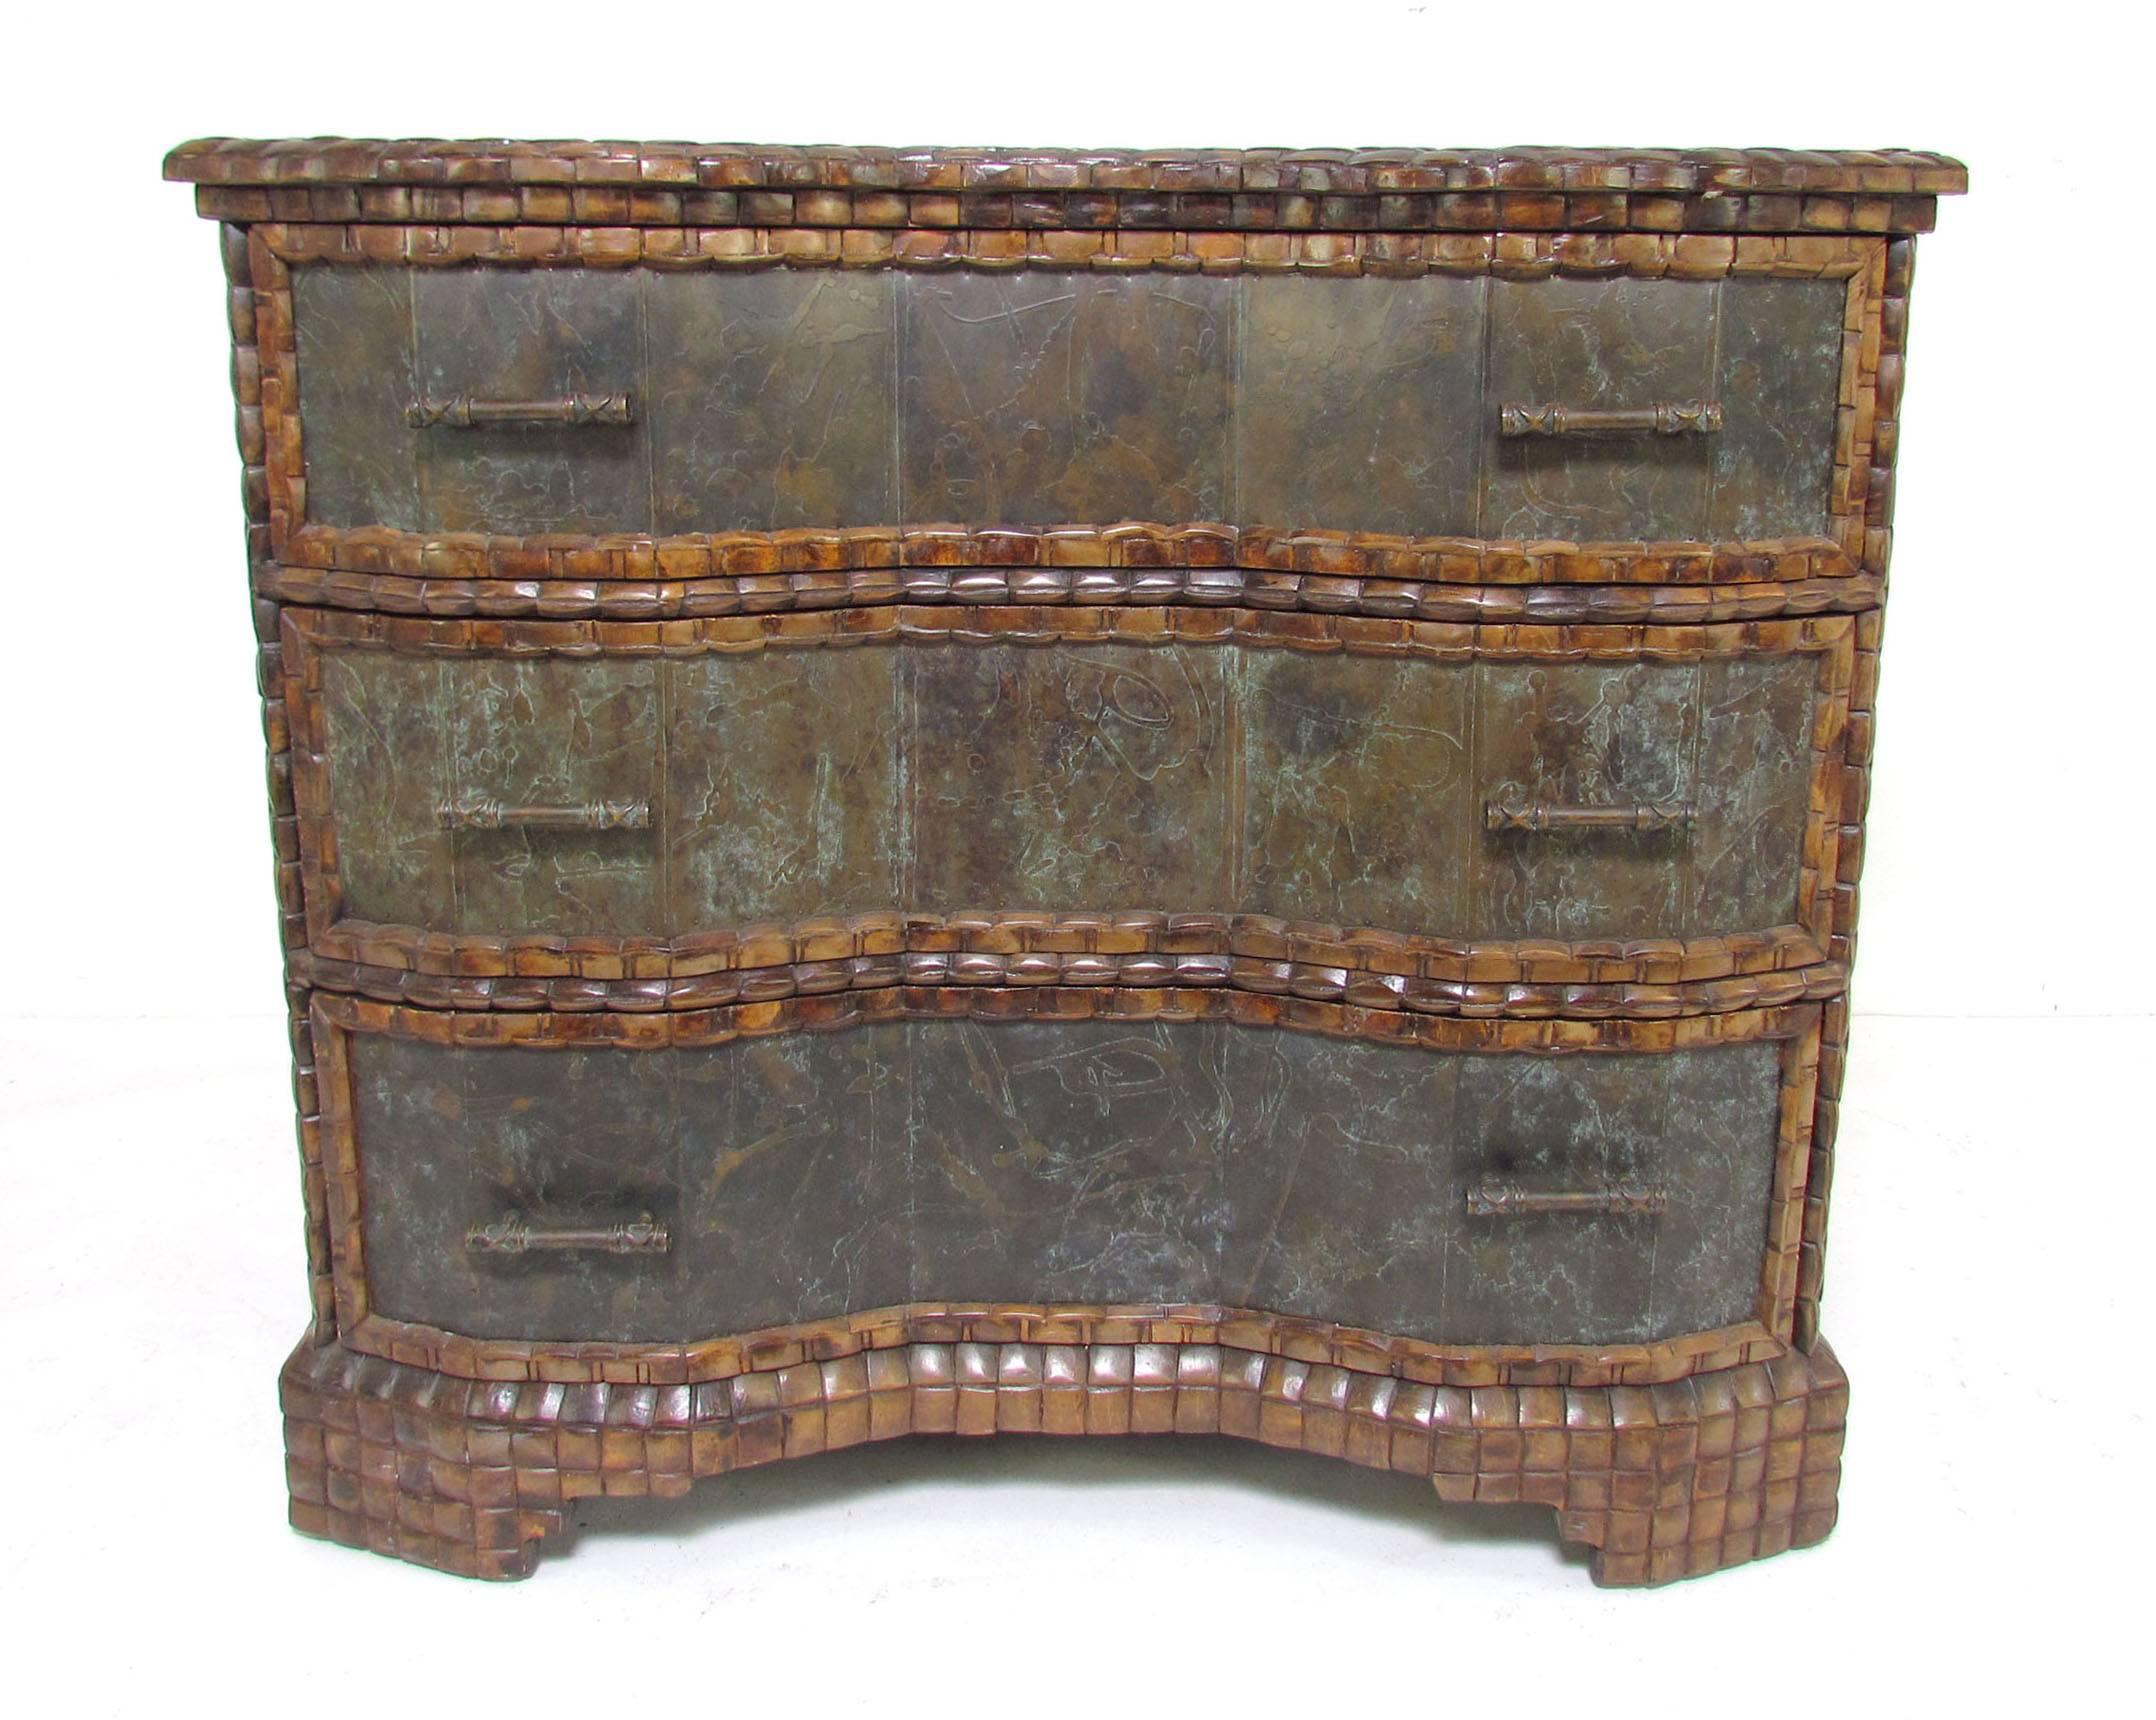 Unusual commode chest by Maitland-Smith. Patinated etched bronze drawers with bronze handles and a coconut shell encrusted case.